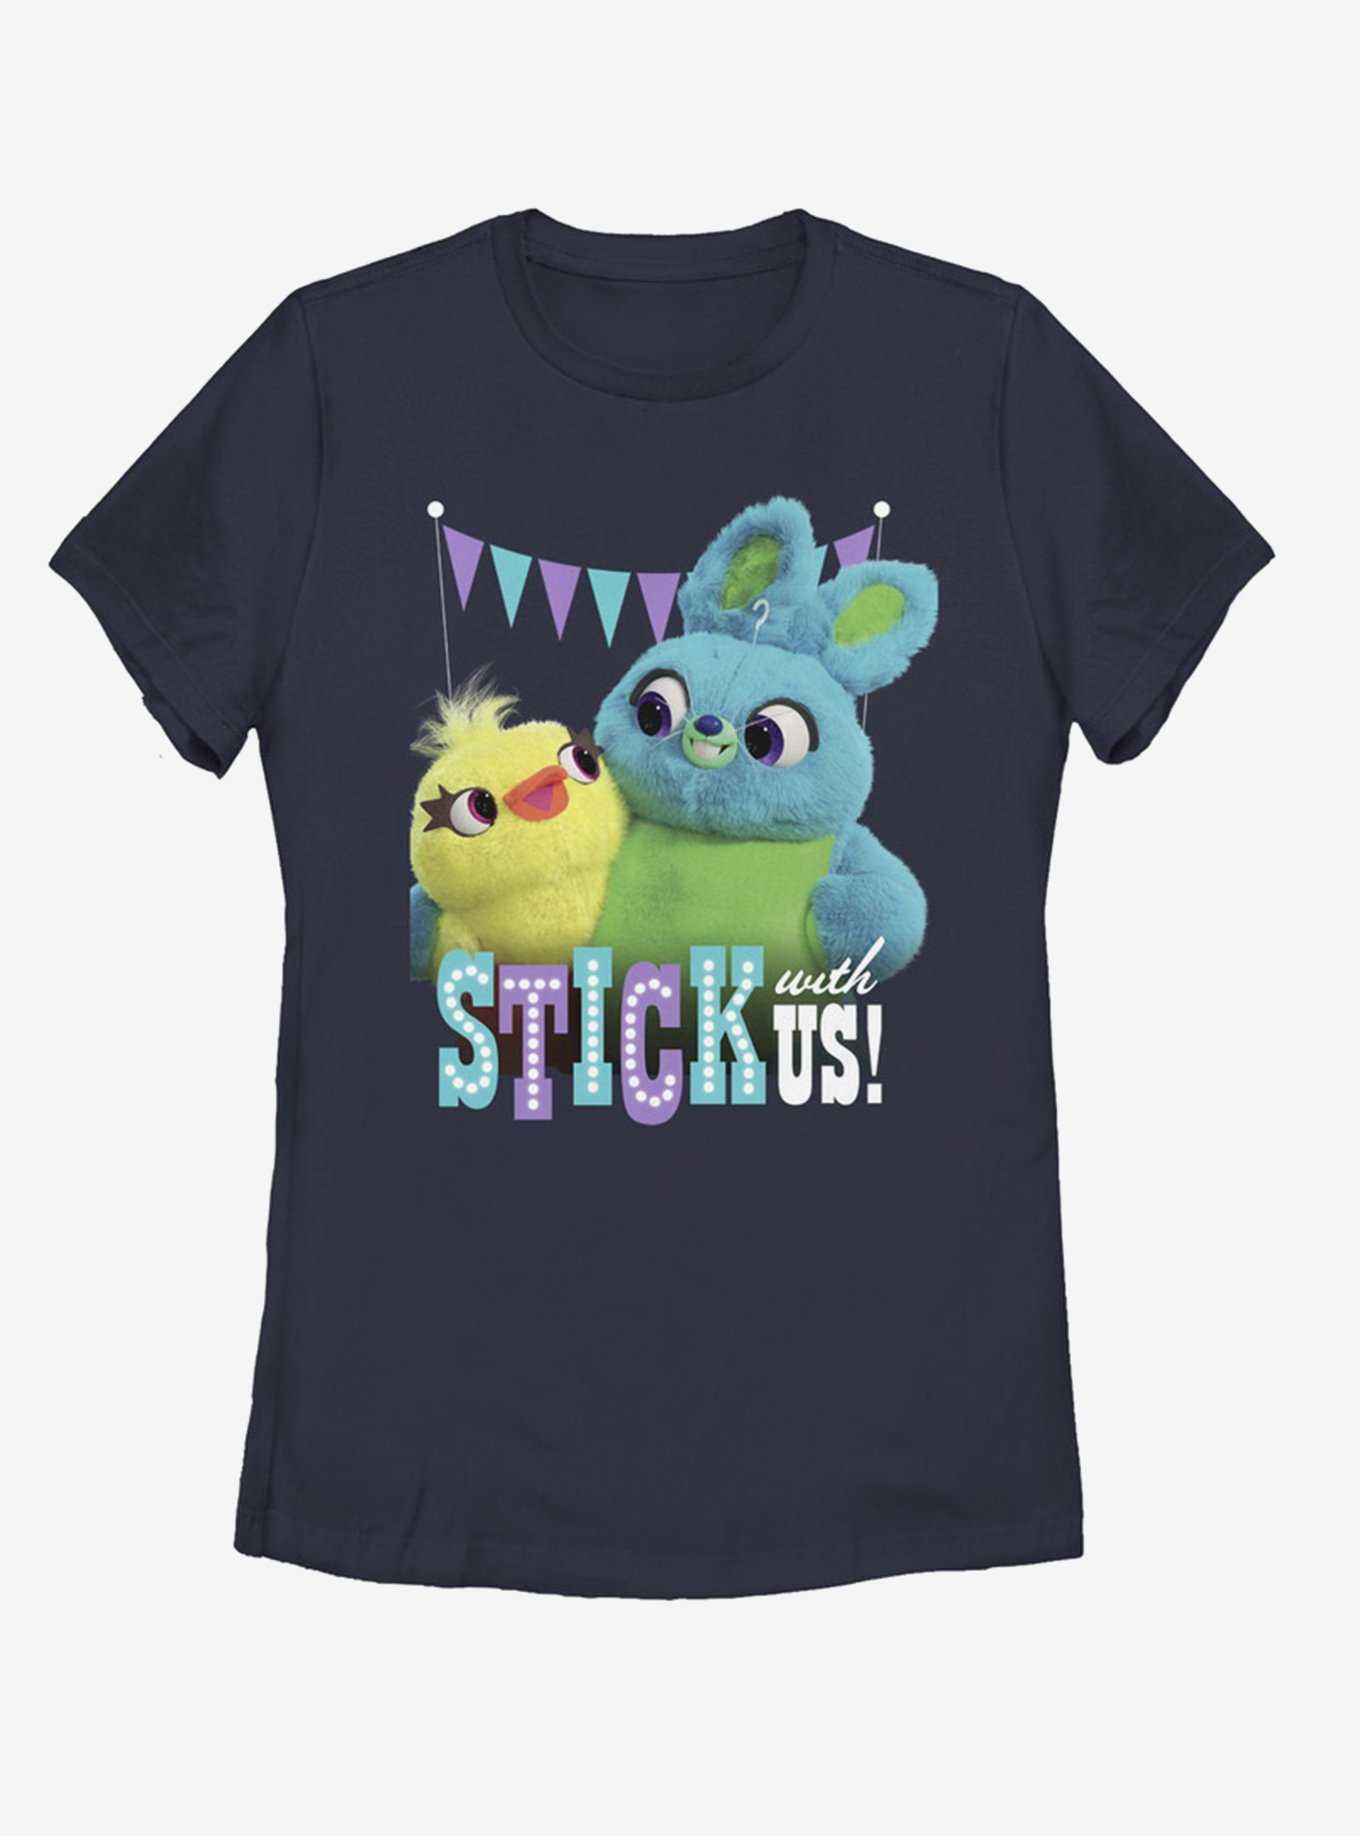 Disney Pixar Toy Story 4 Ducky Bunny Stick With Us Womens T-Shirt, , hi-res